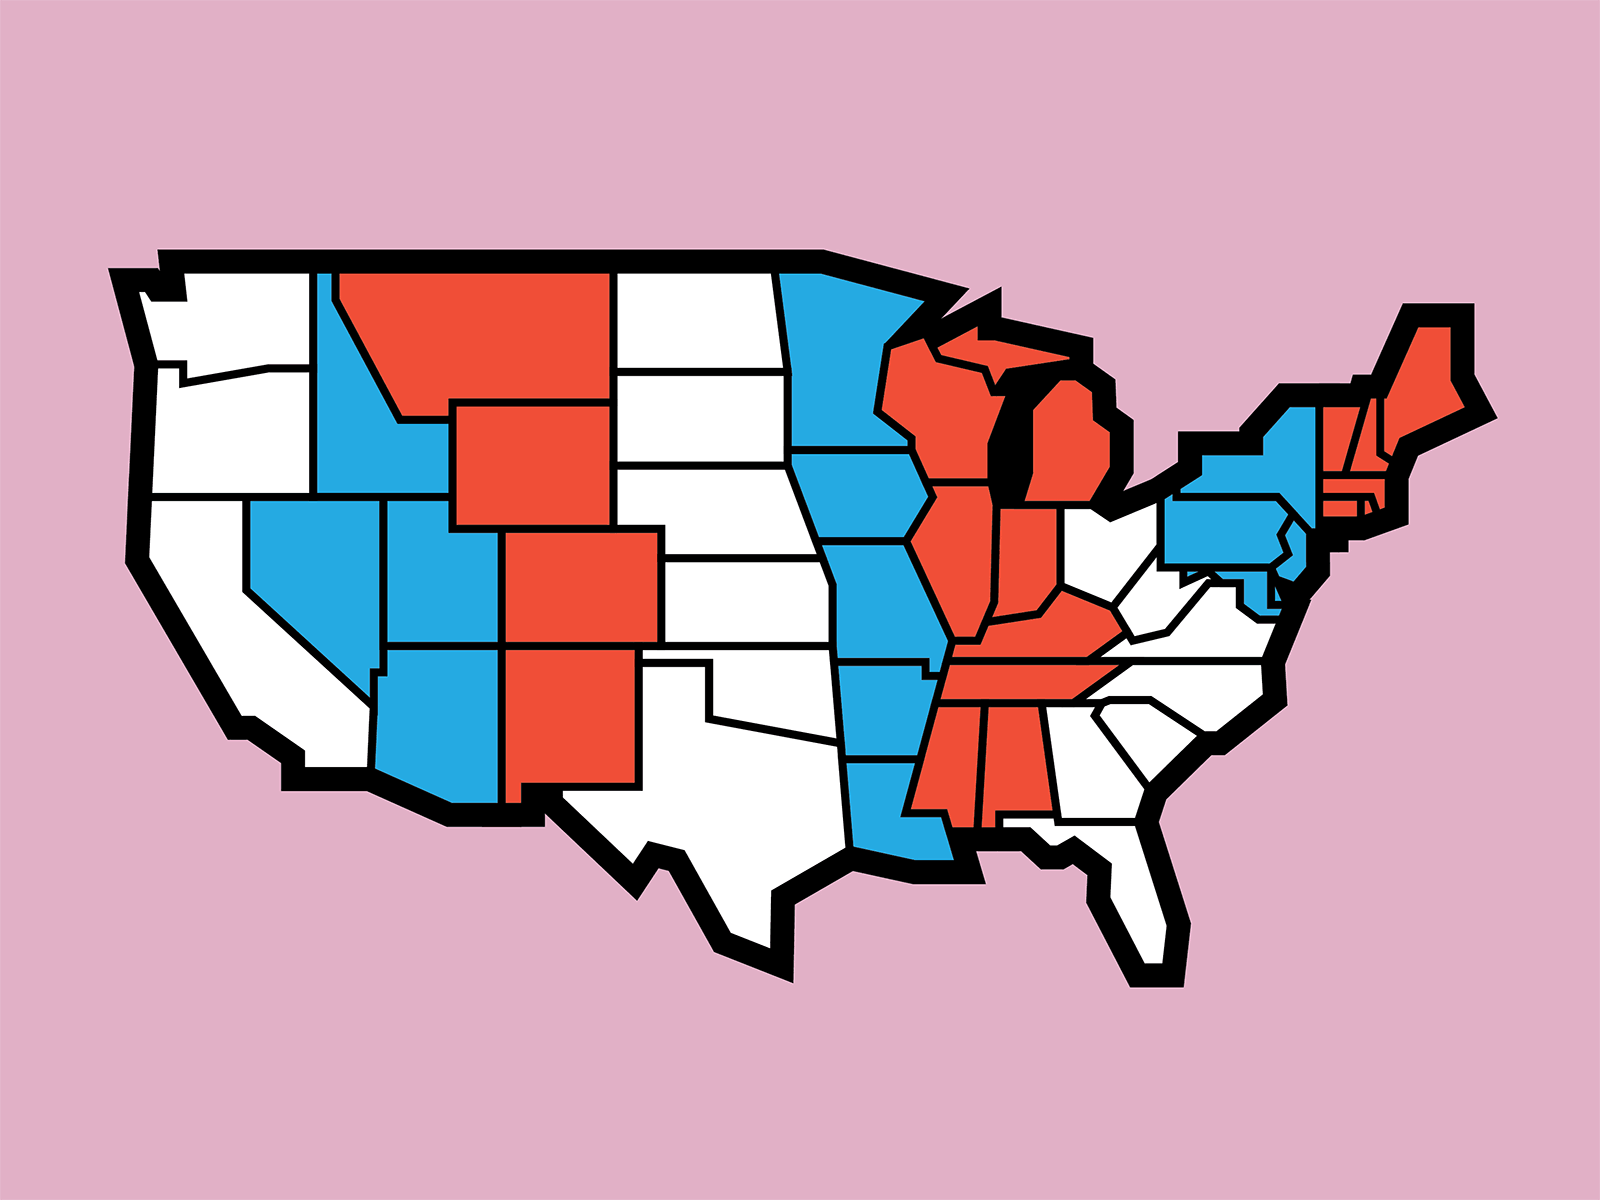 American Pop america animation blocky blue colors country geometric illustration map red states thick lines united states usa wave white